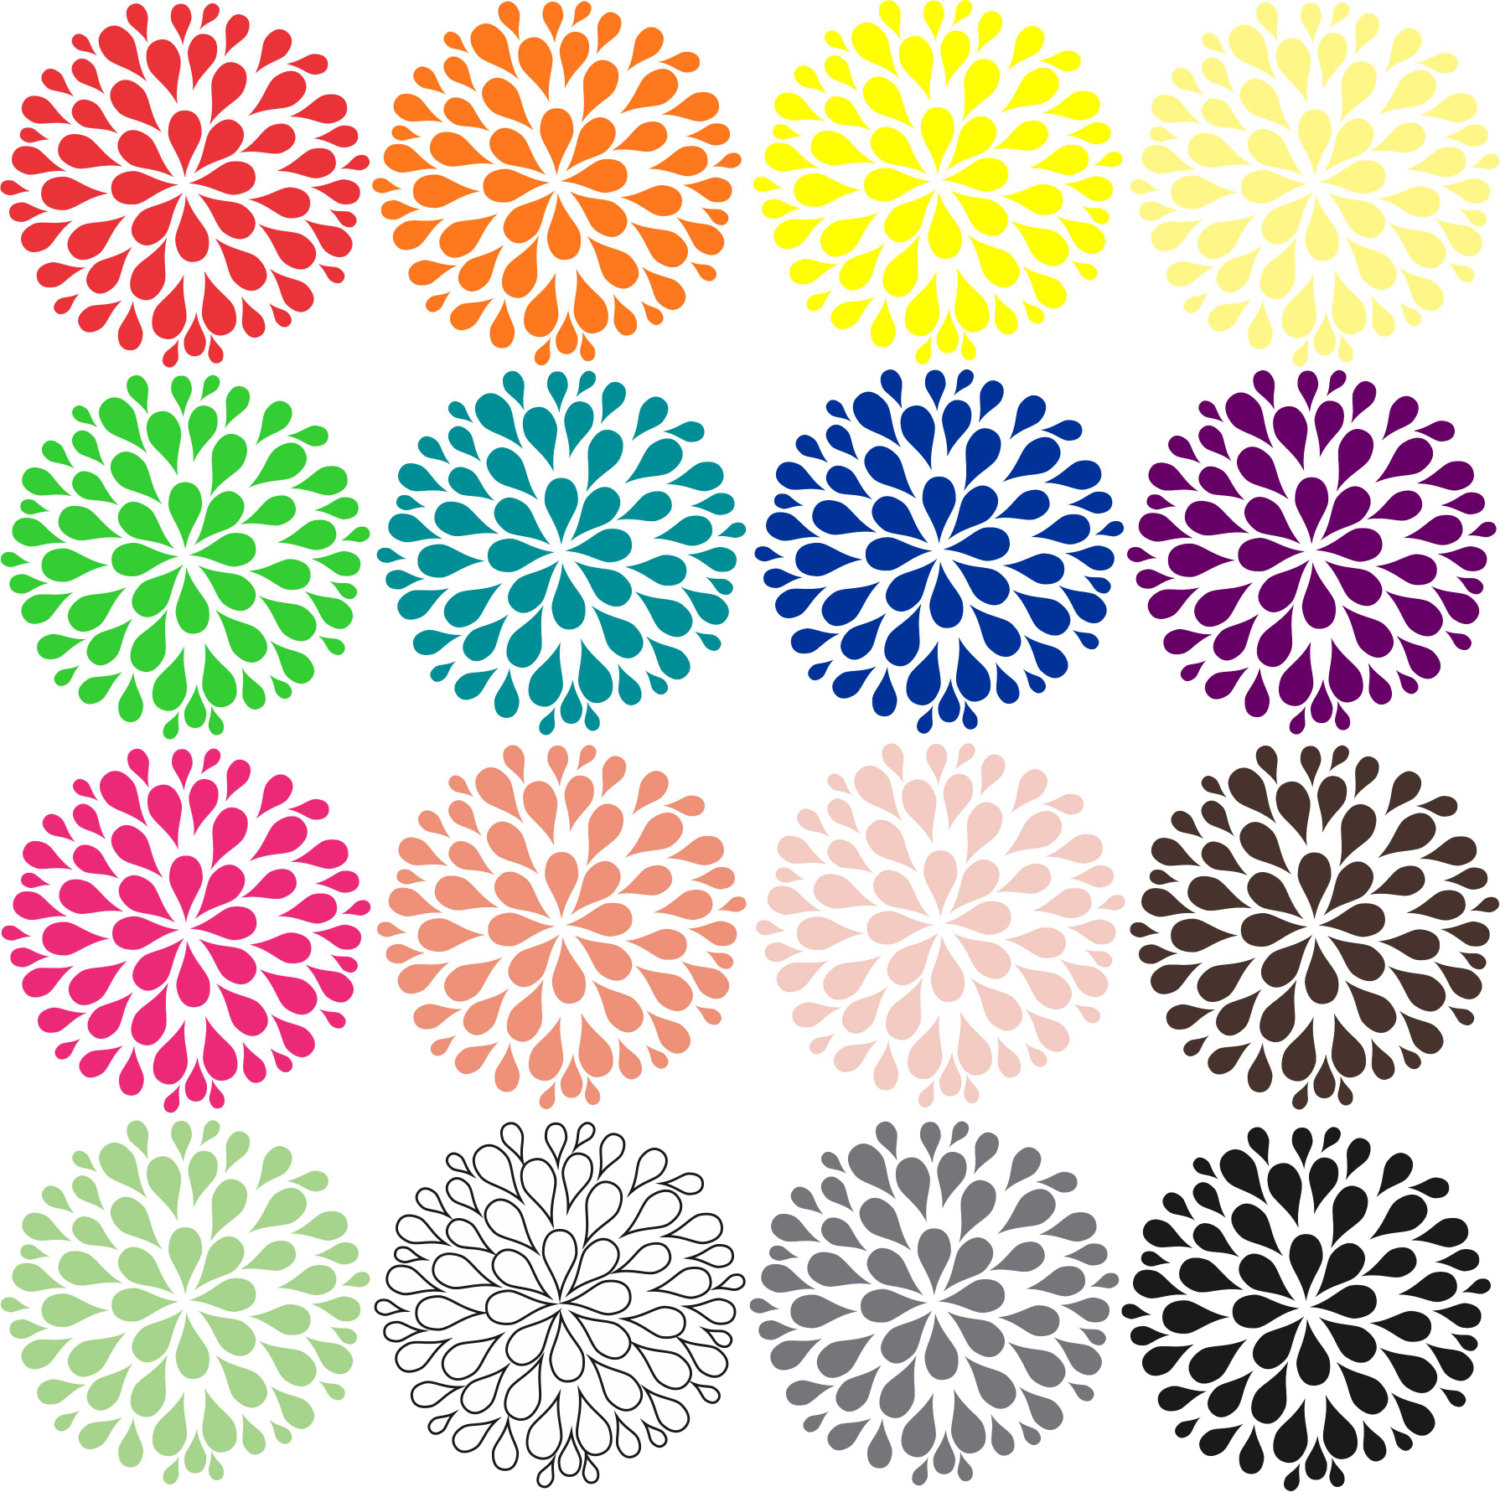 Free Dahlia Flower Cliparts, Download Free Clip Art, Free.